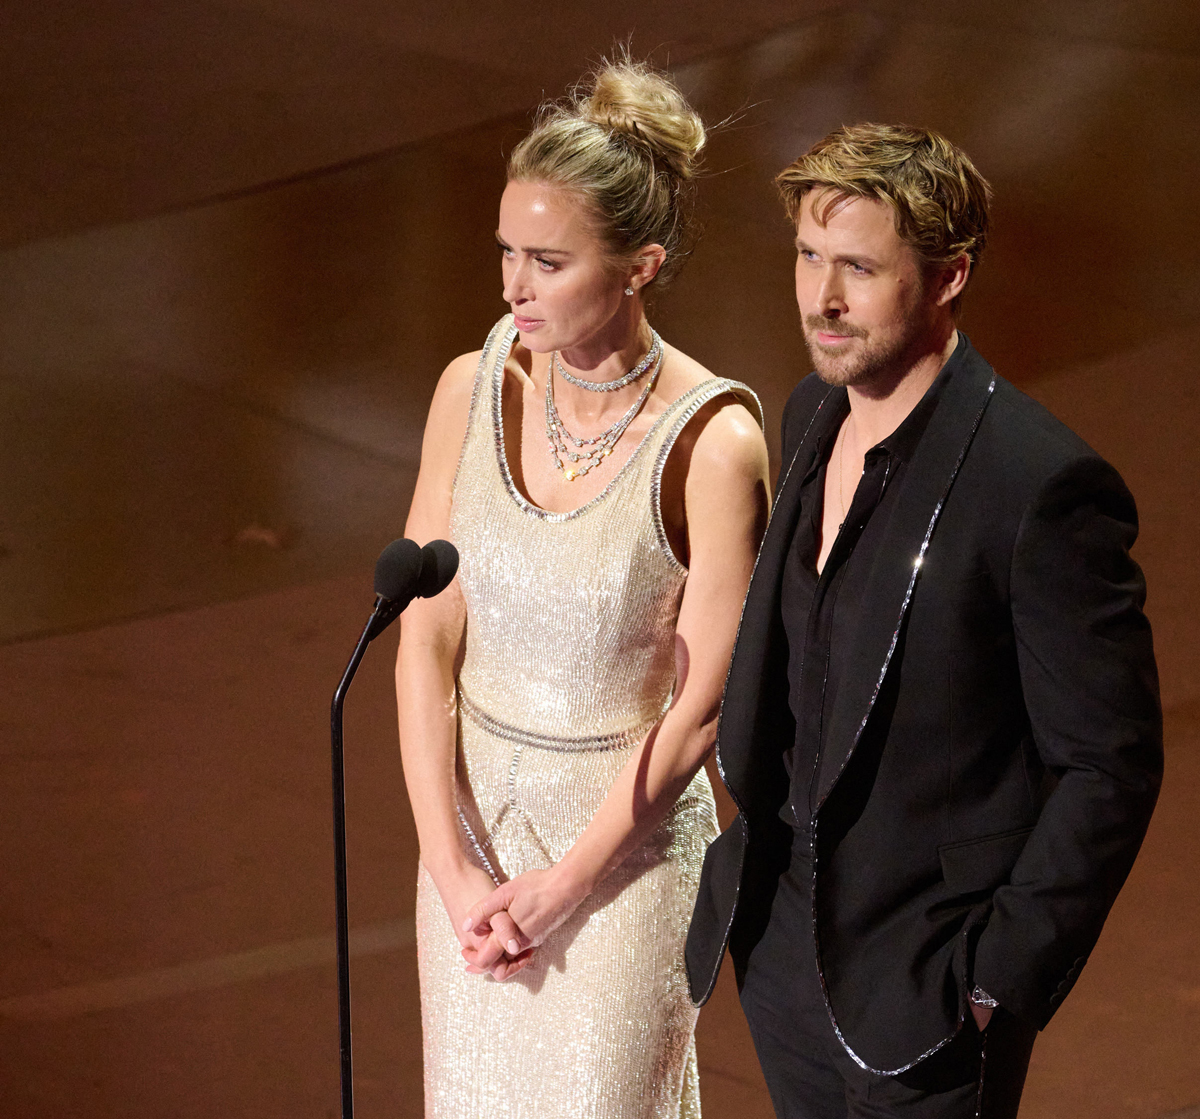 Emily Blunt onstage at Oscars with Ryan Gosling